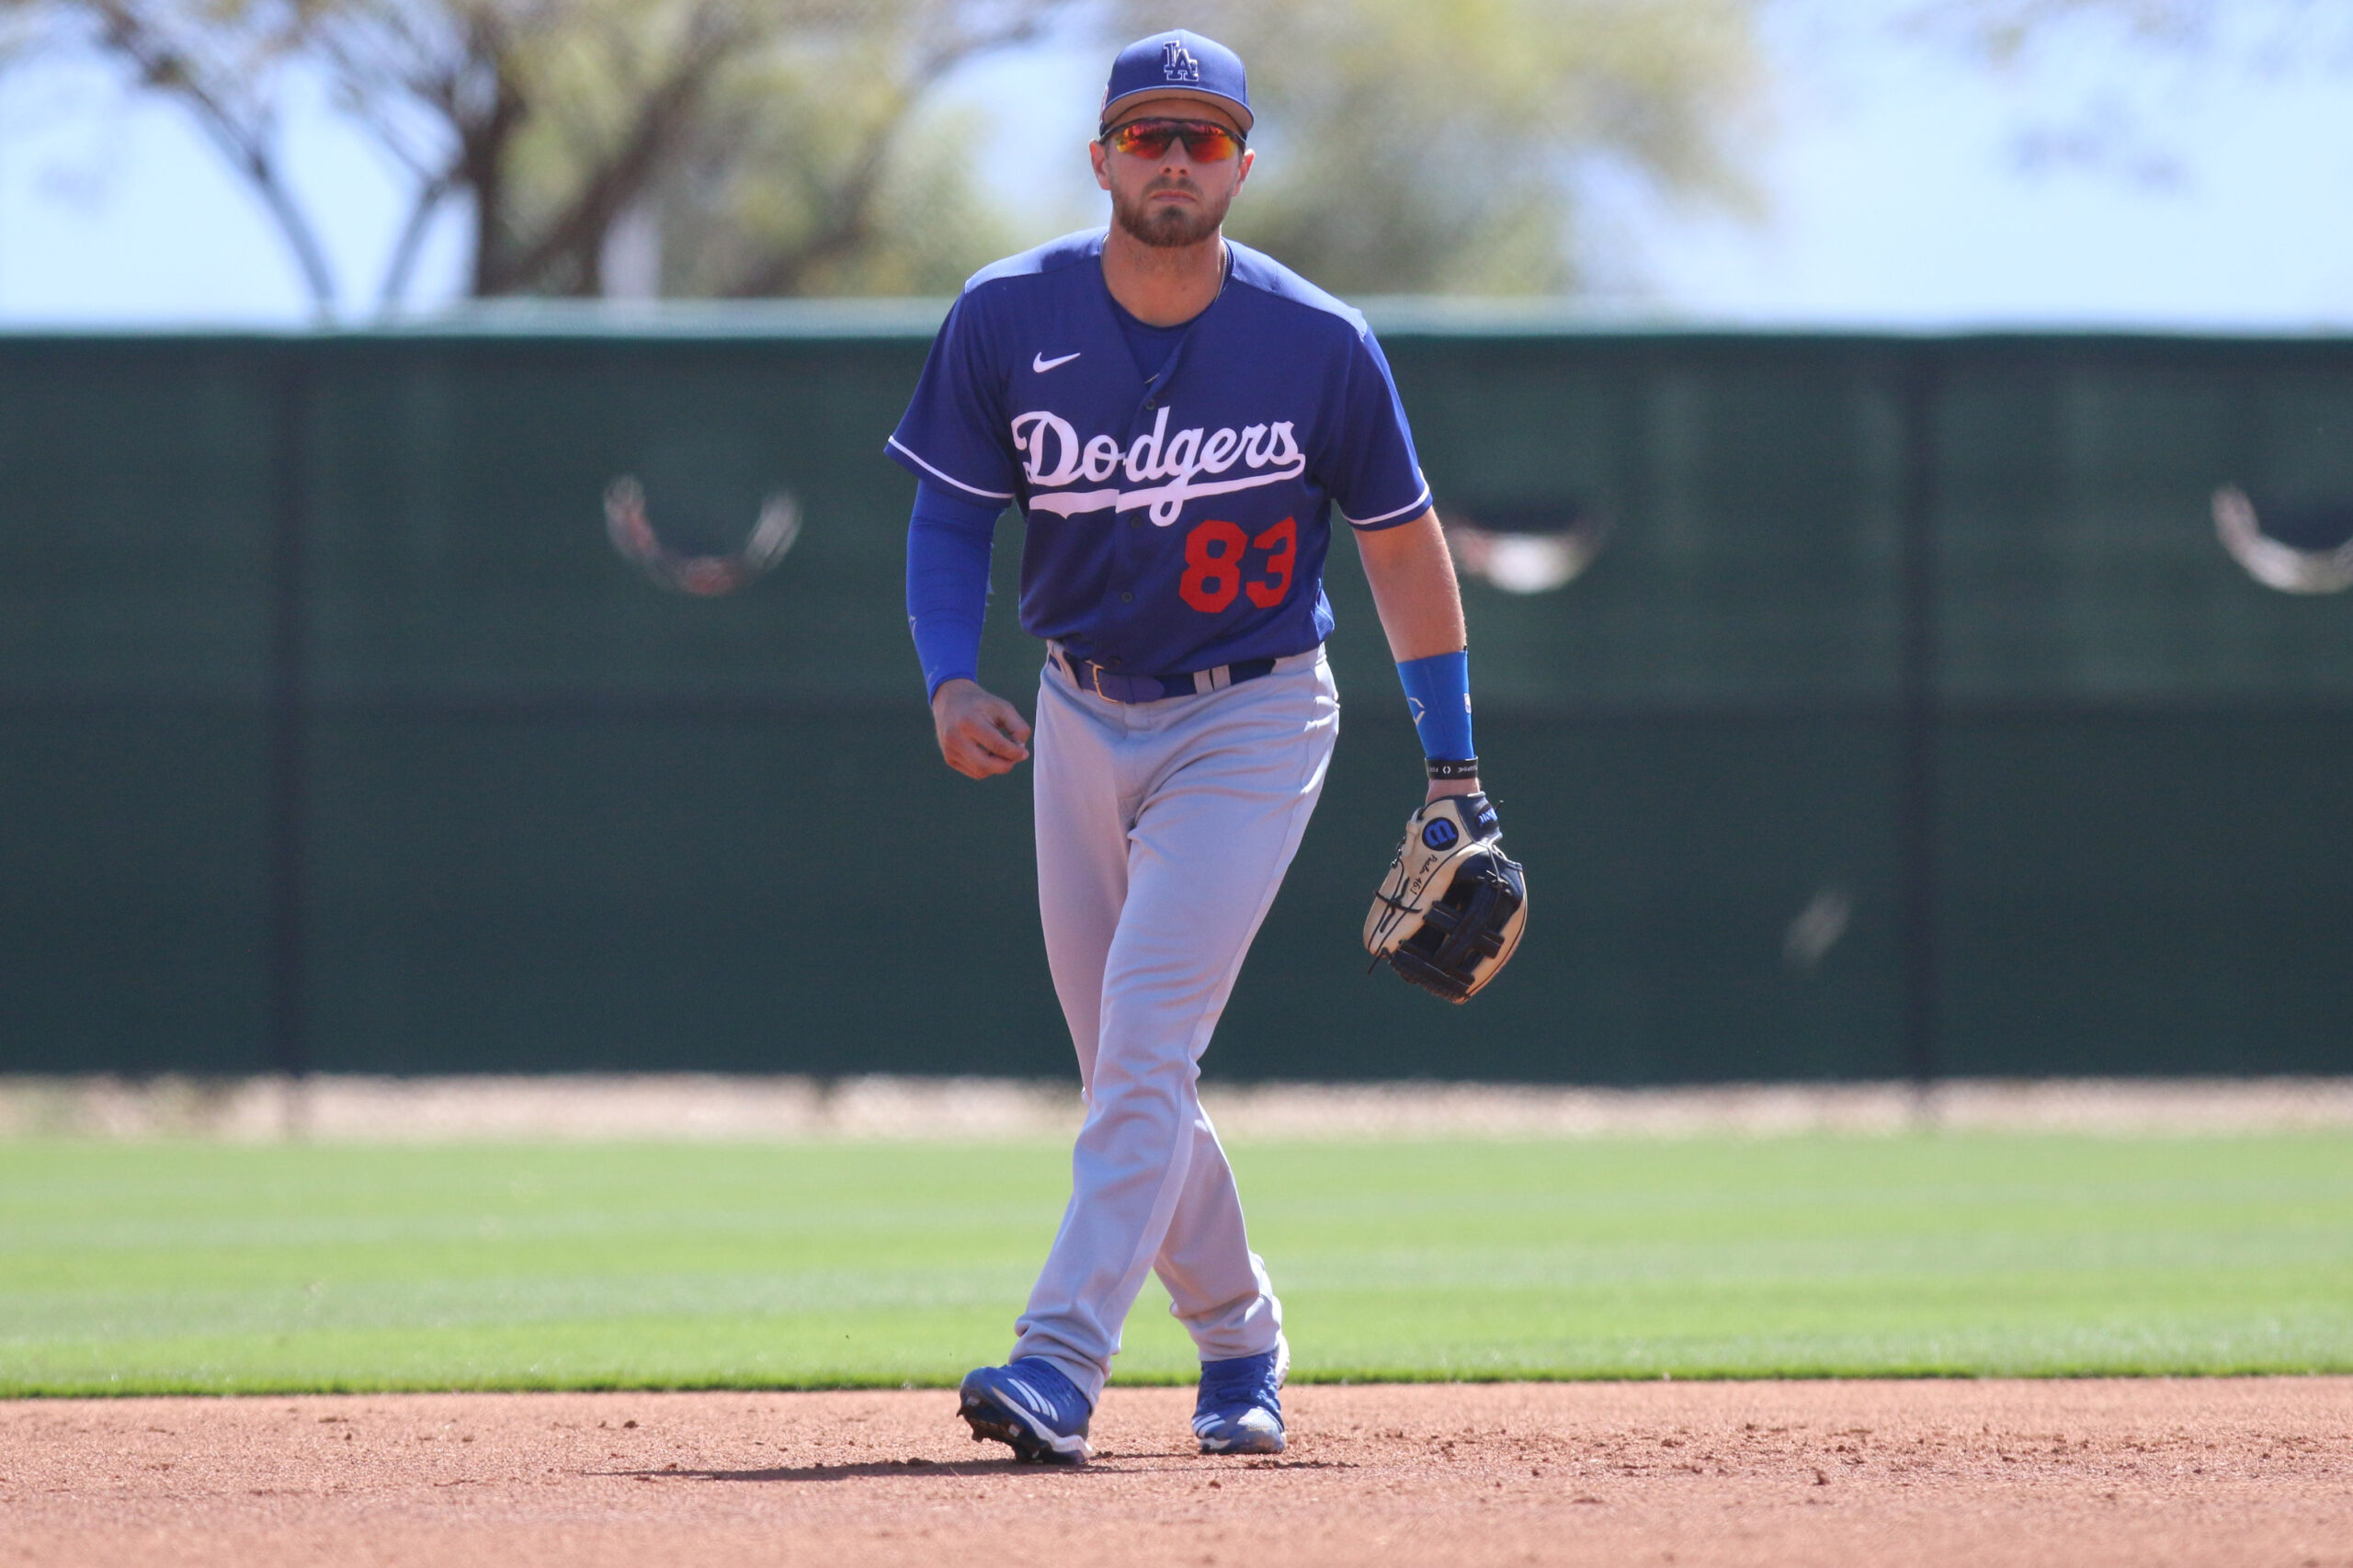 Dodgers Prospect Notes: Busch plays 3B, Doncon goes deep, Martin